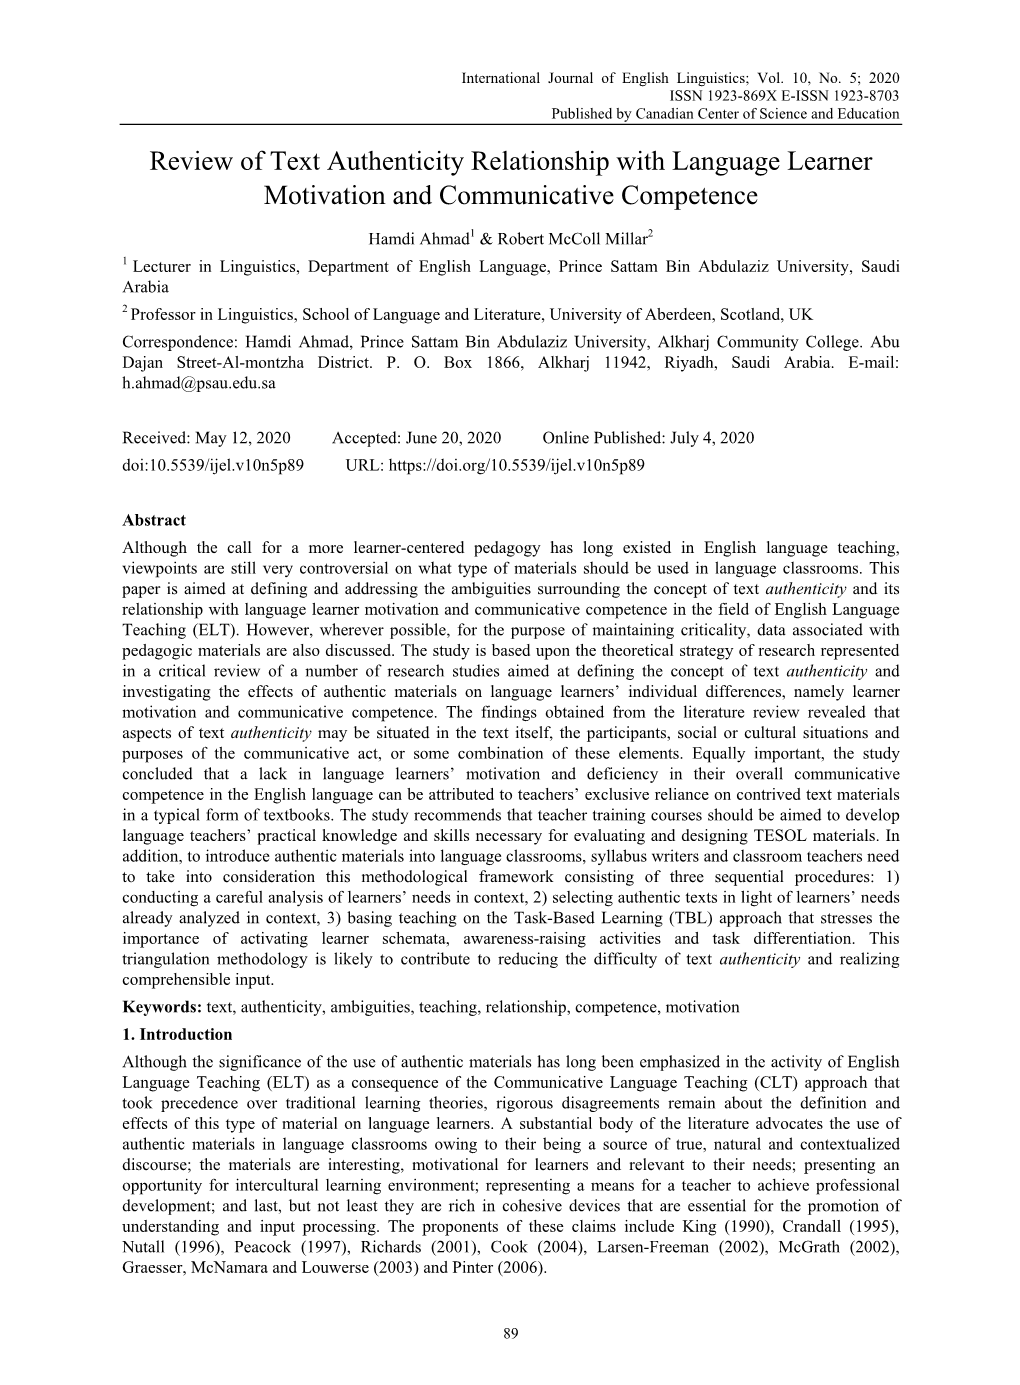 Review of Text Authenticity Relationship with Language Learner Motivation and Communicative Competence